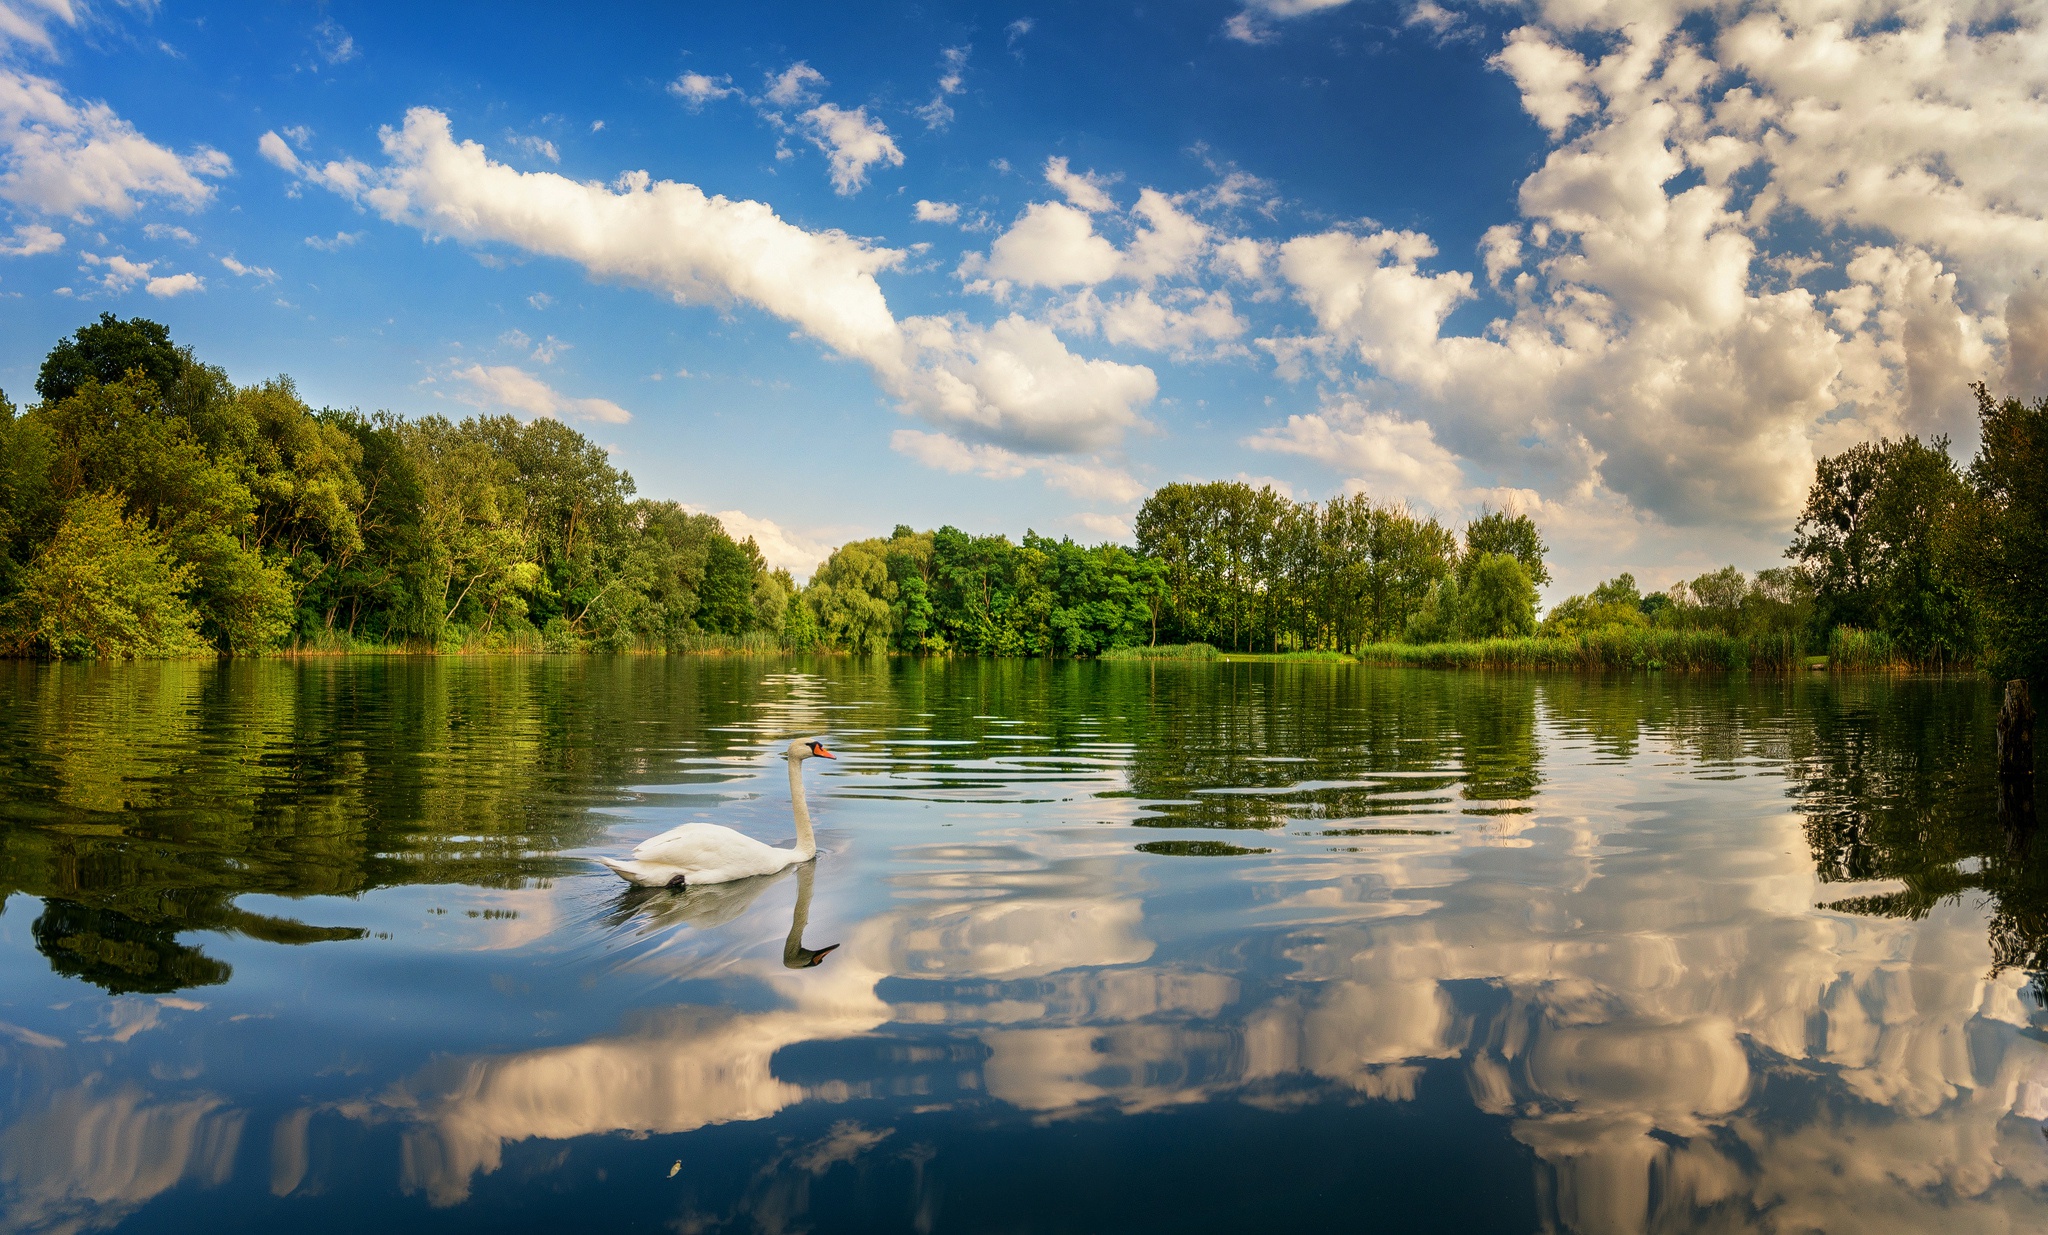 General 2048x1235 water birds blue sky nature lake swans